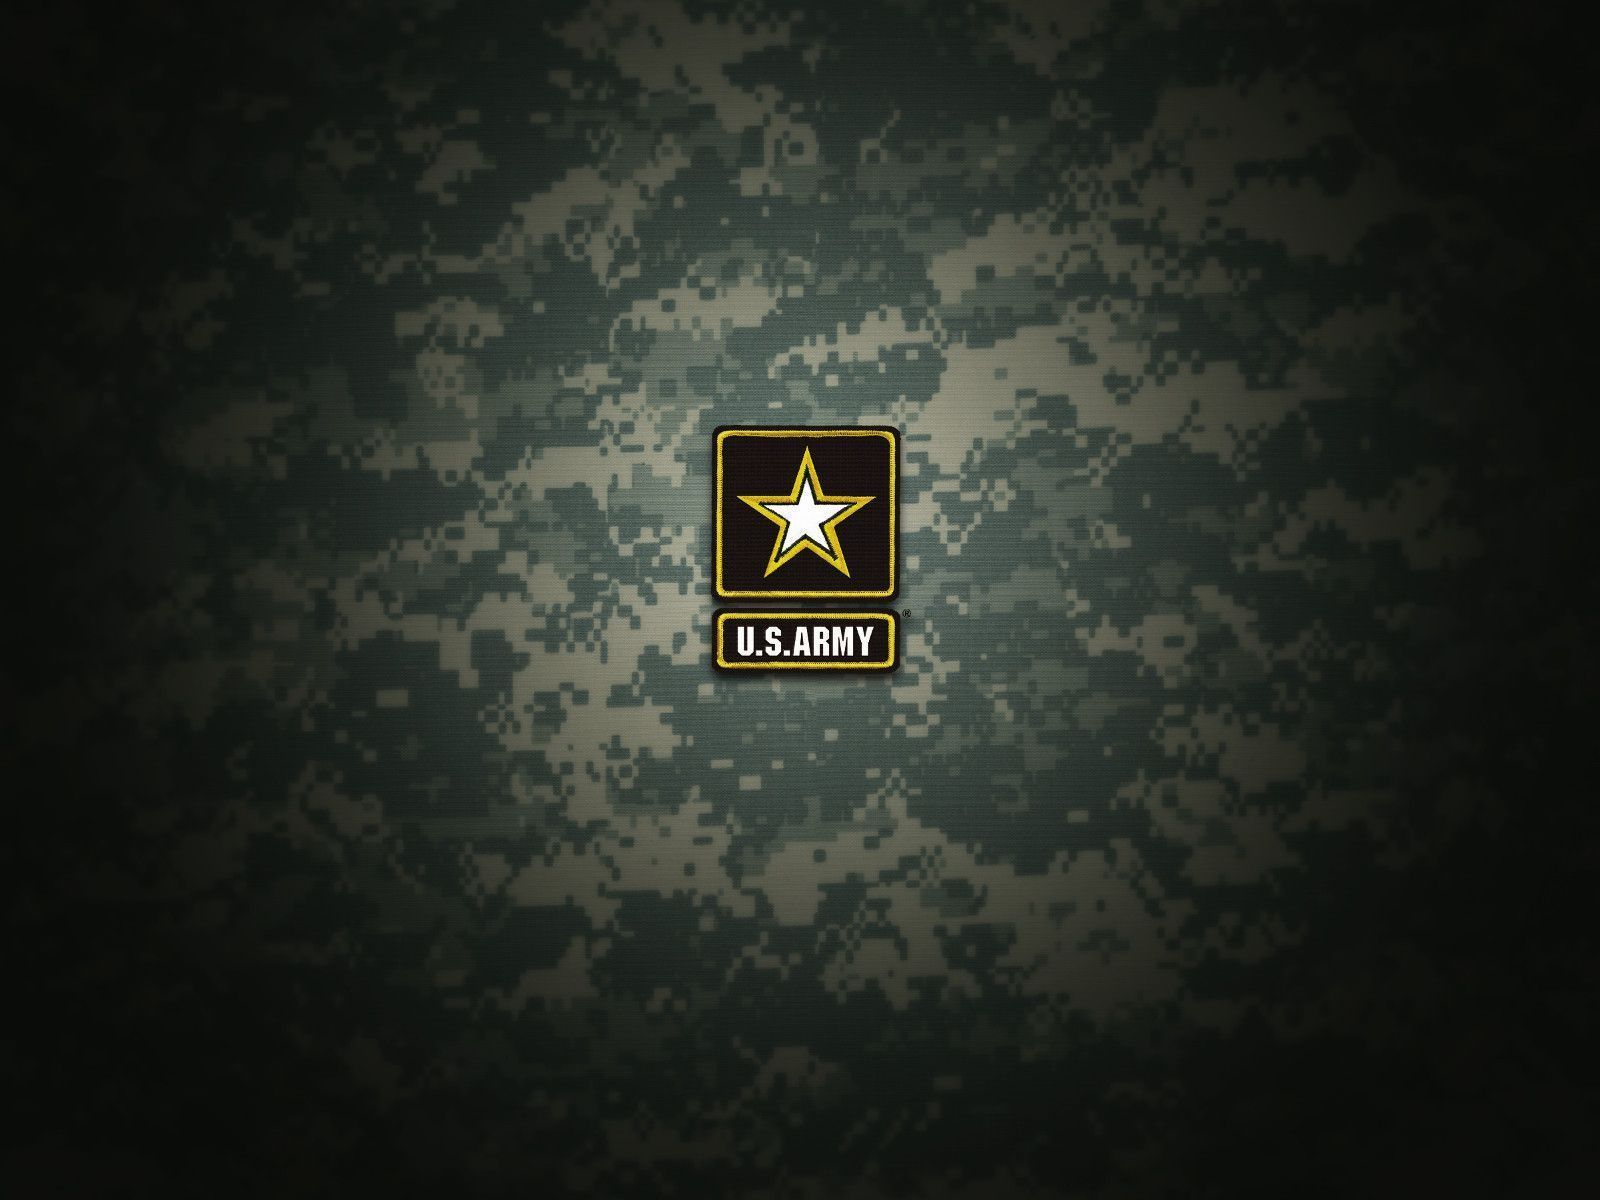 Military logo wallpapers